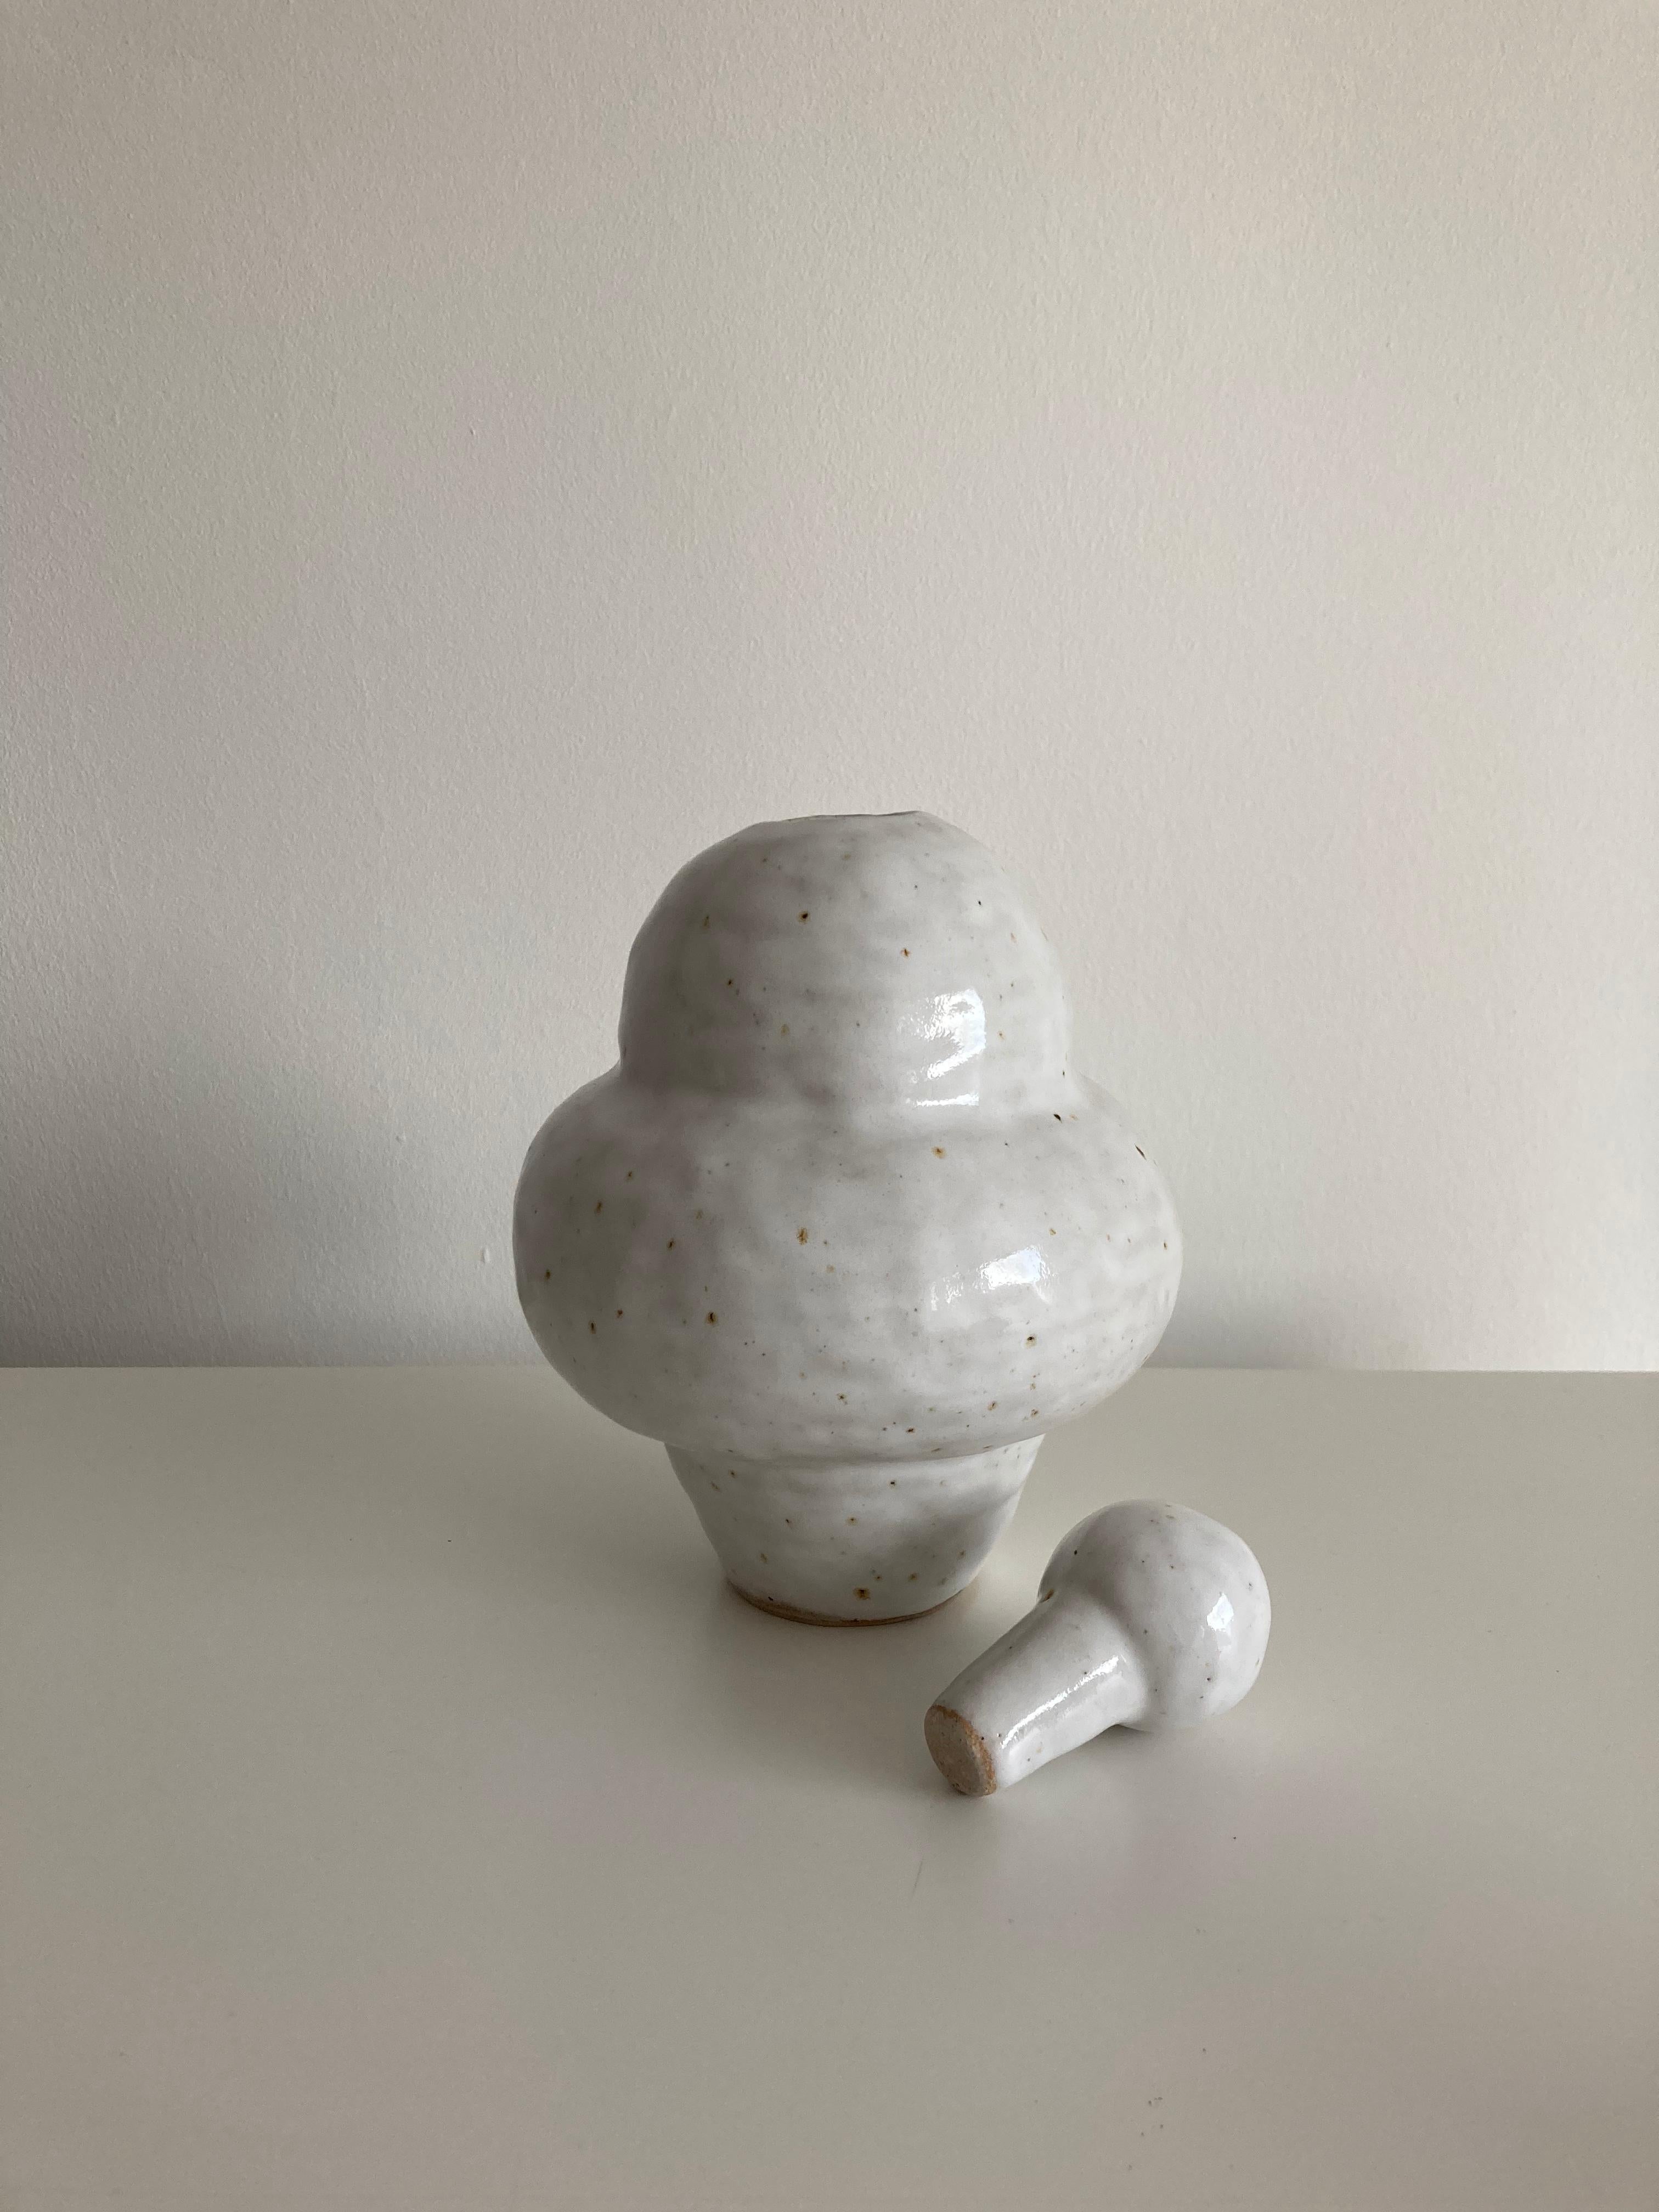 No.83 Stoneware sculpture, Tonfisk by Ciona Lee 
One of a Kind
Dimensions: Ø 14 x H 16 cm
Materials: Speckled stoneware, shiny white glaze
Variations of size and colour available,

Tonfisk is the ceramic practice by Ciona Lee, a Korean-Italian